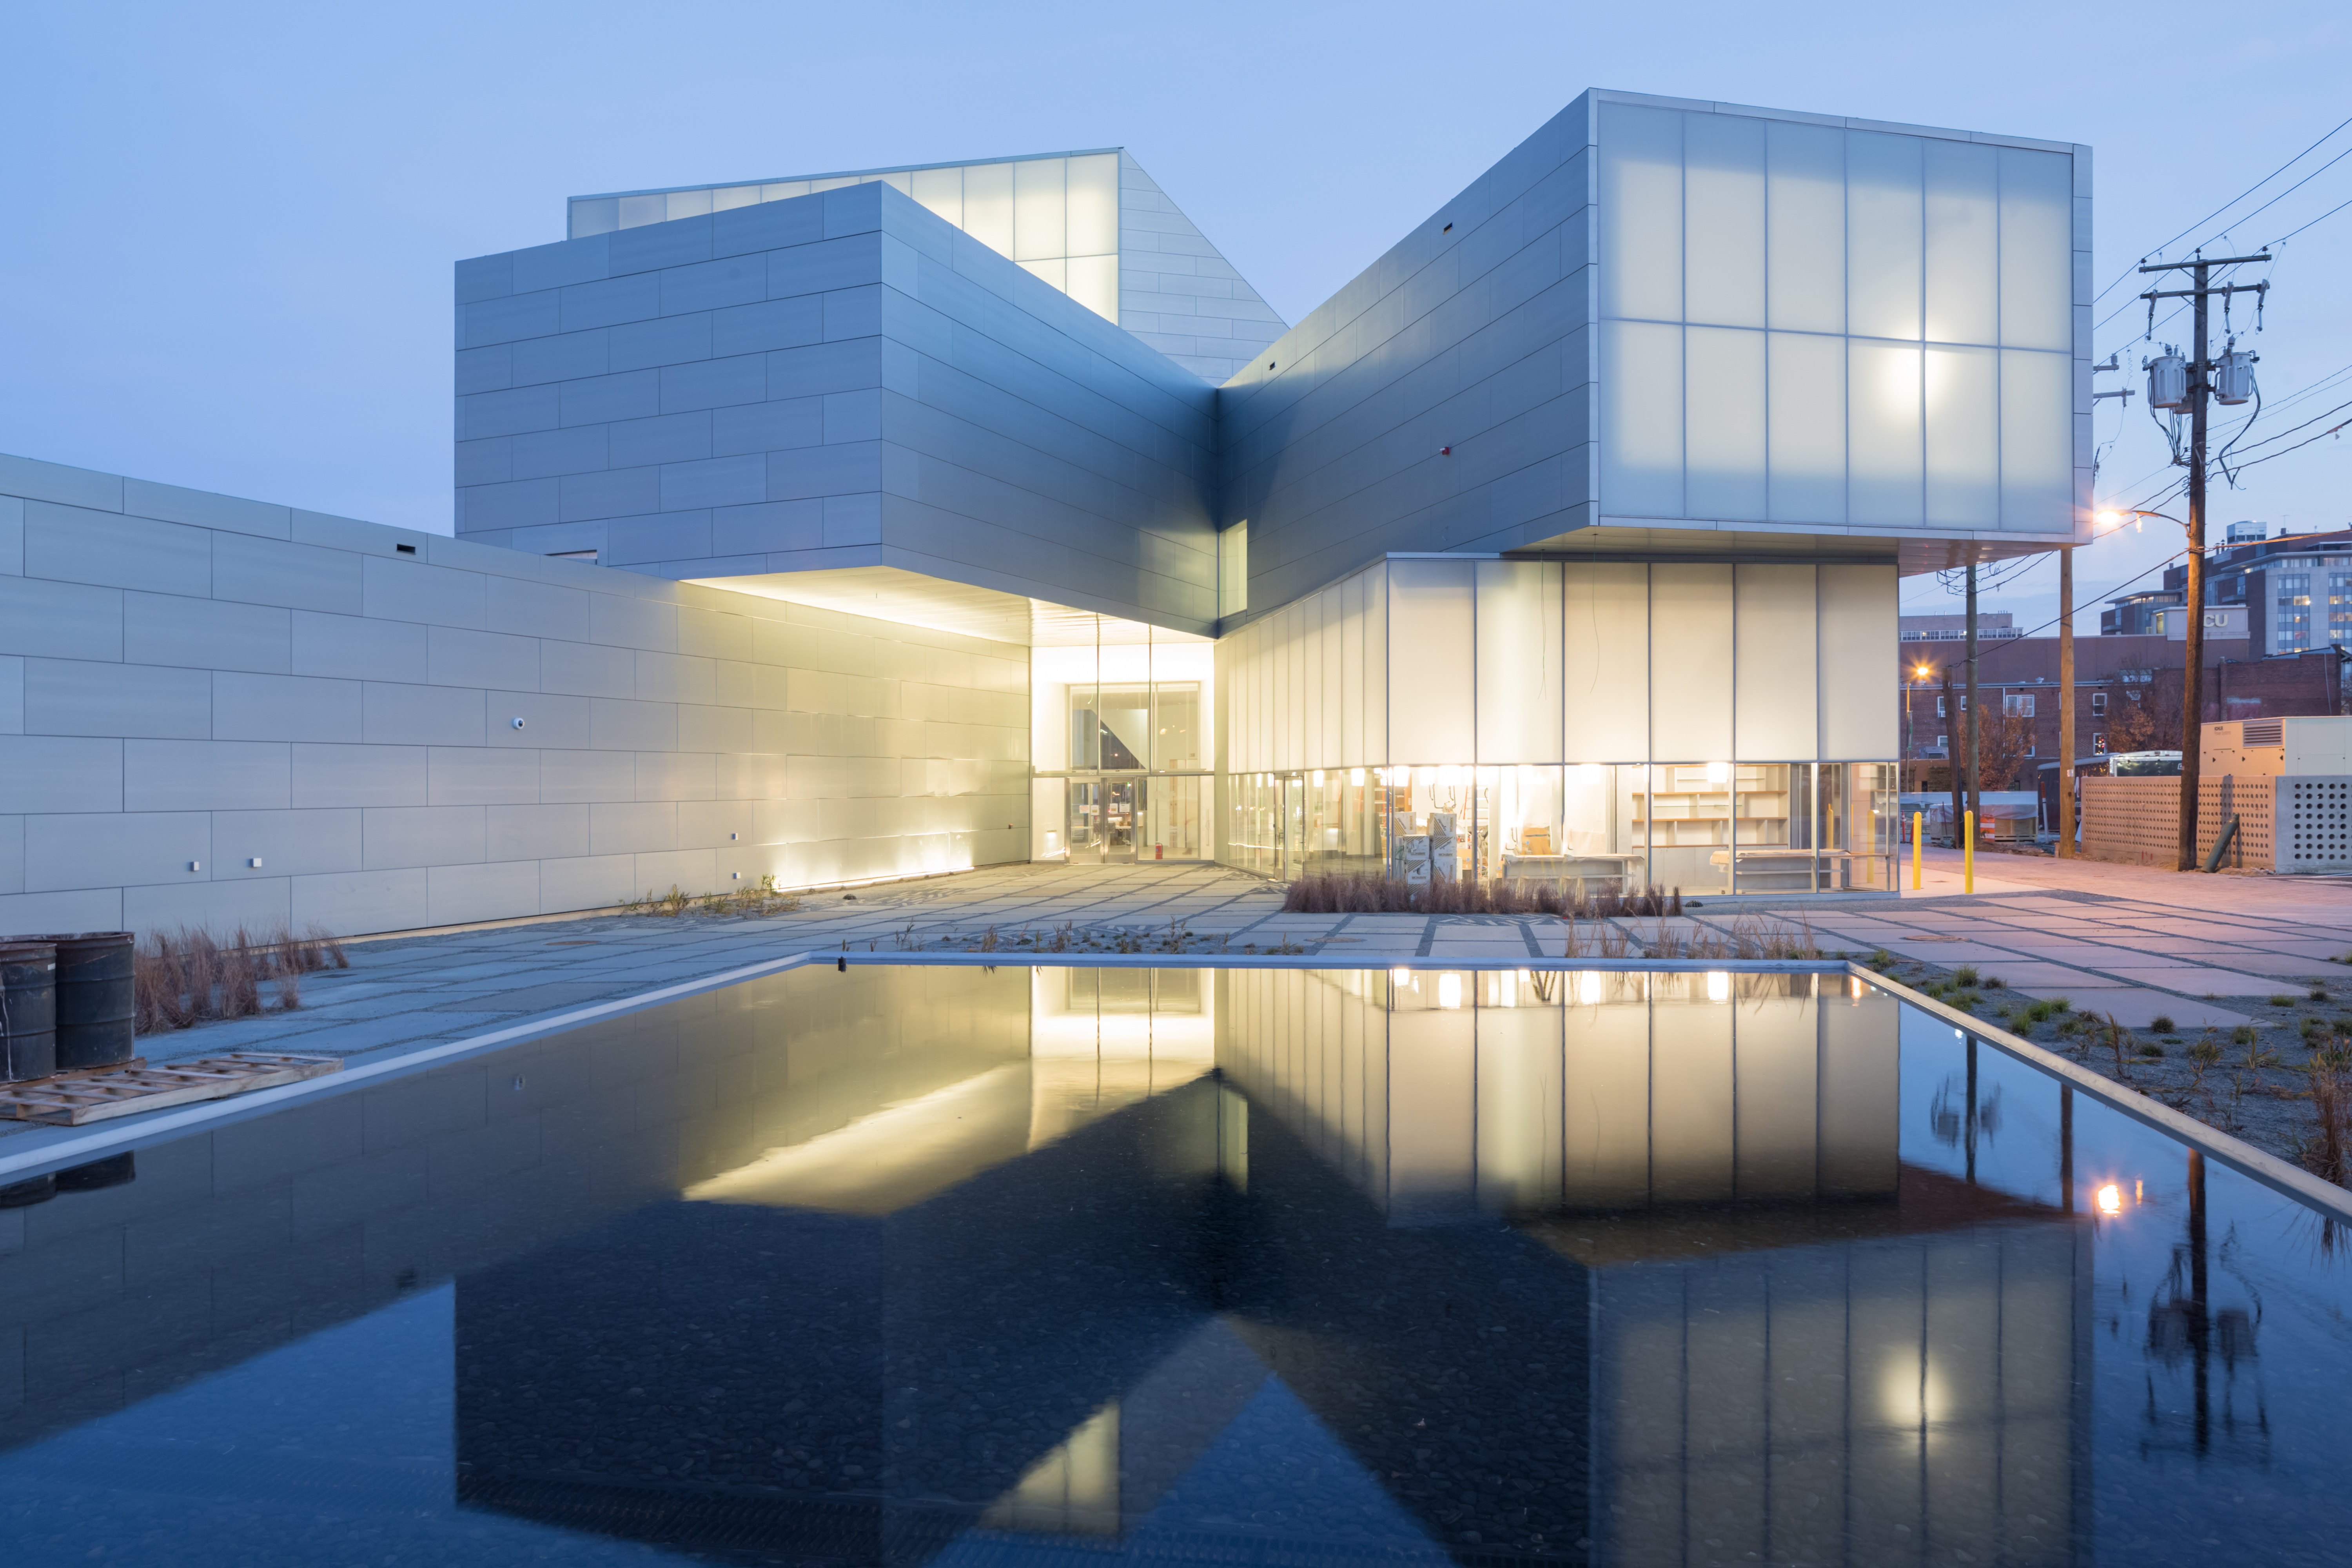 Richmond’s new Institute of Contemporary Art, designed by Steven Holl Architects.